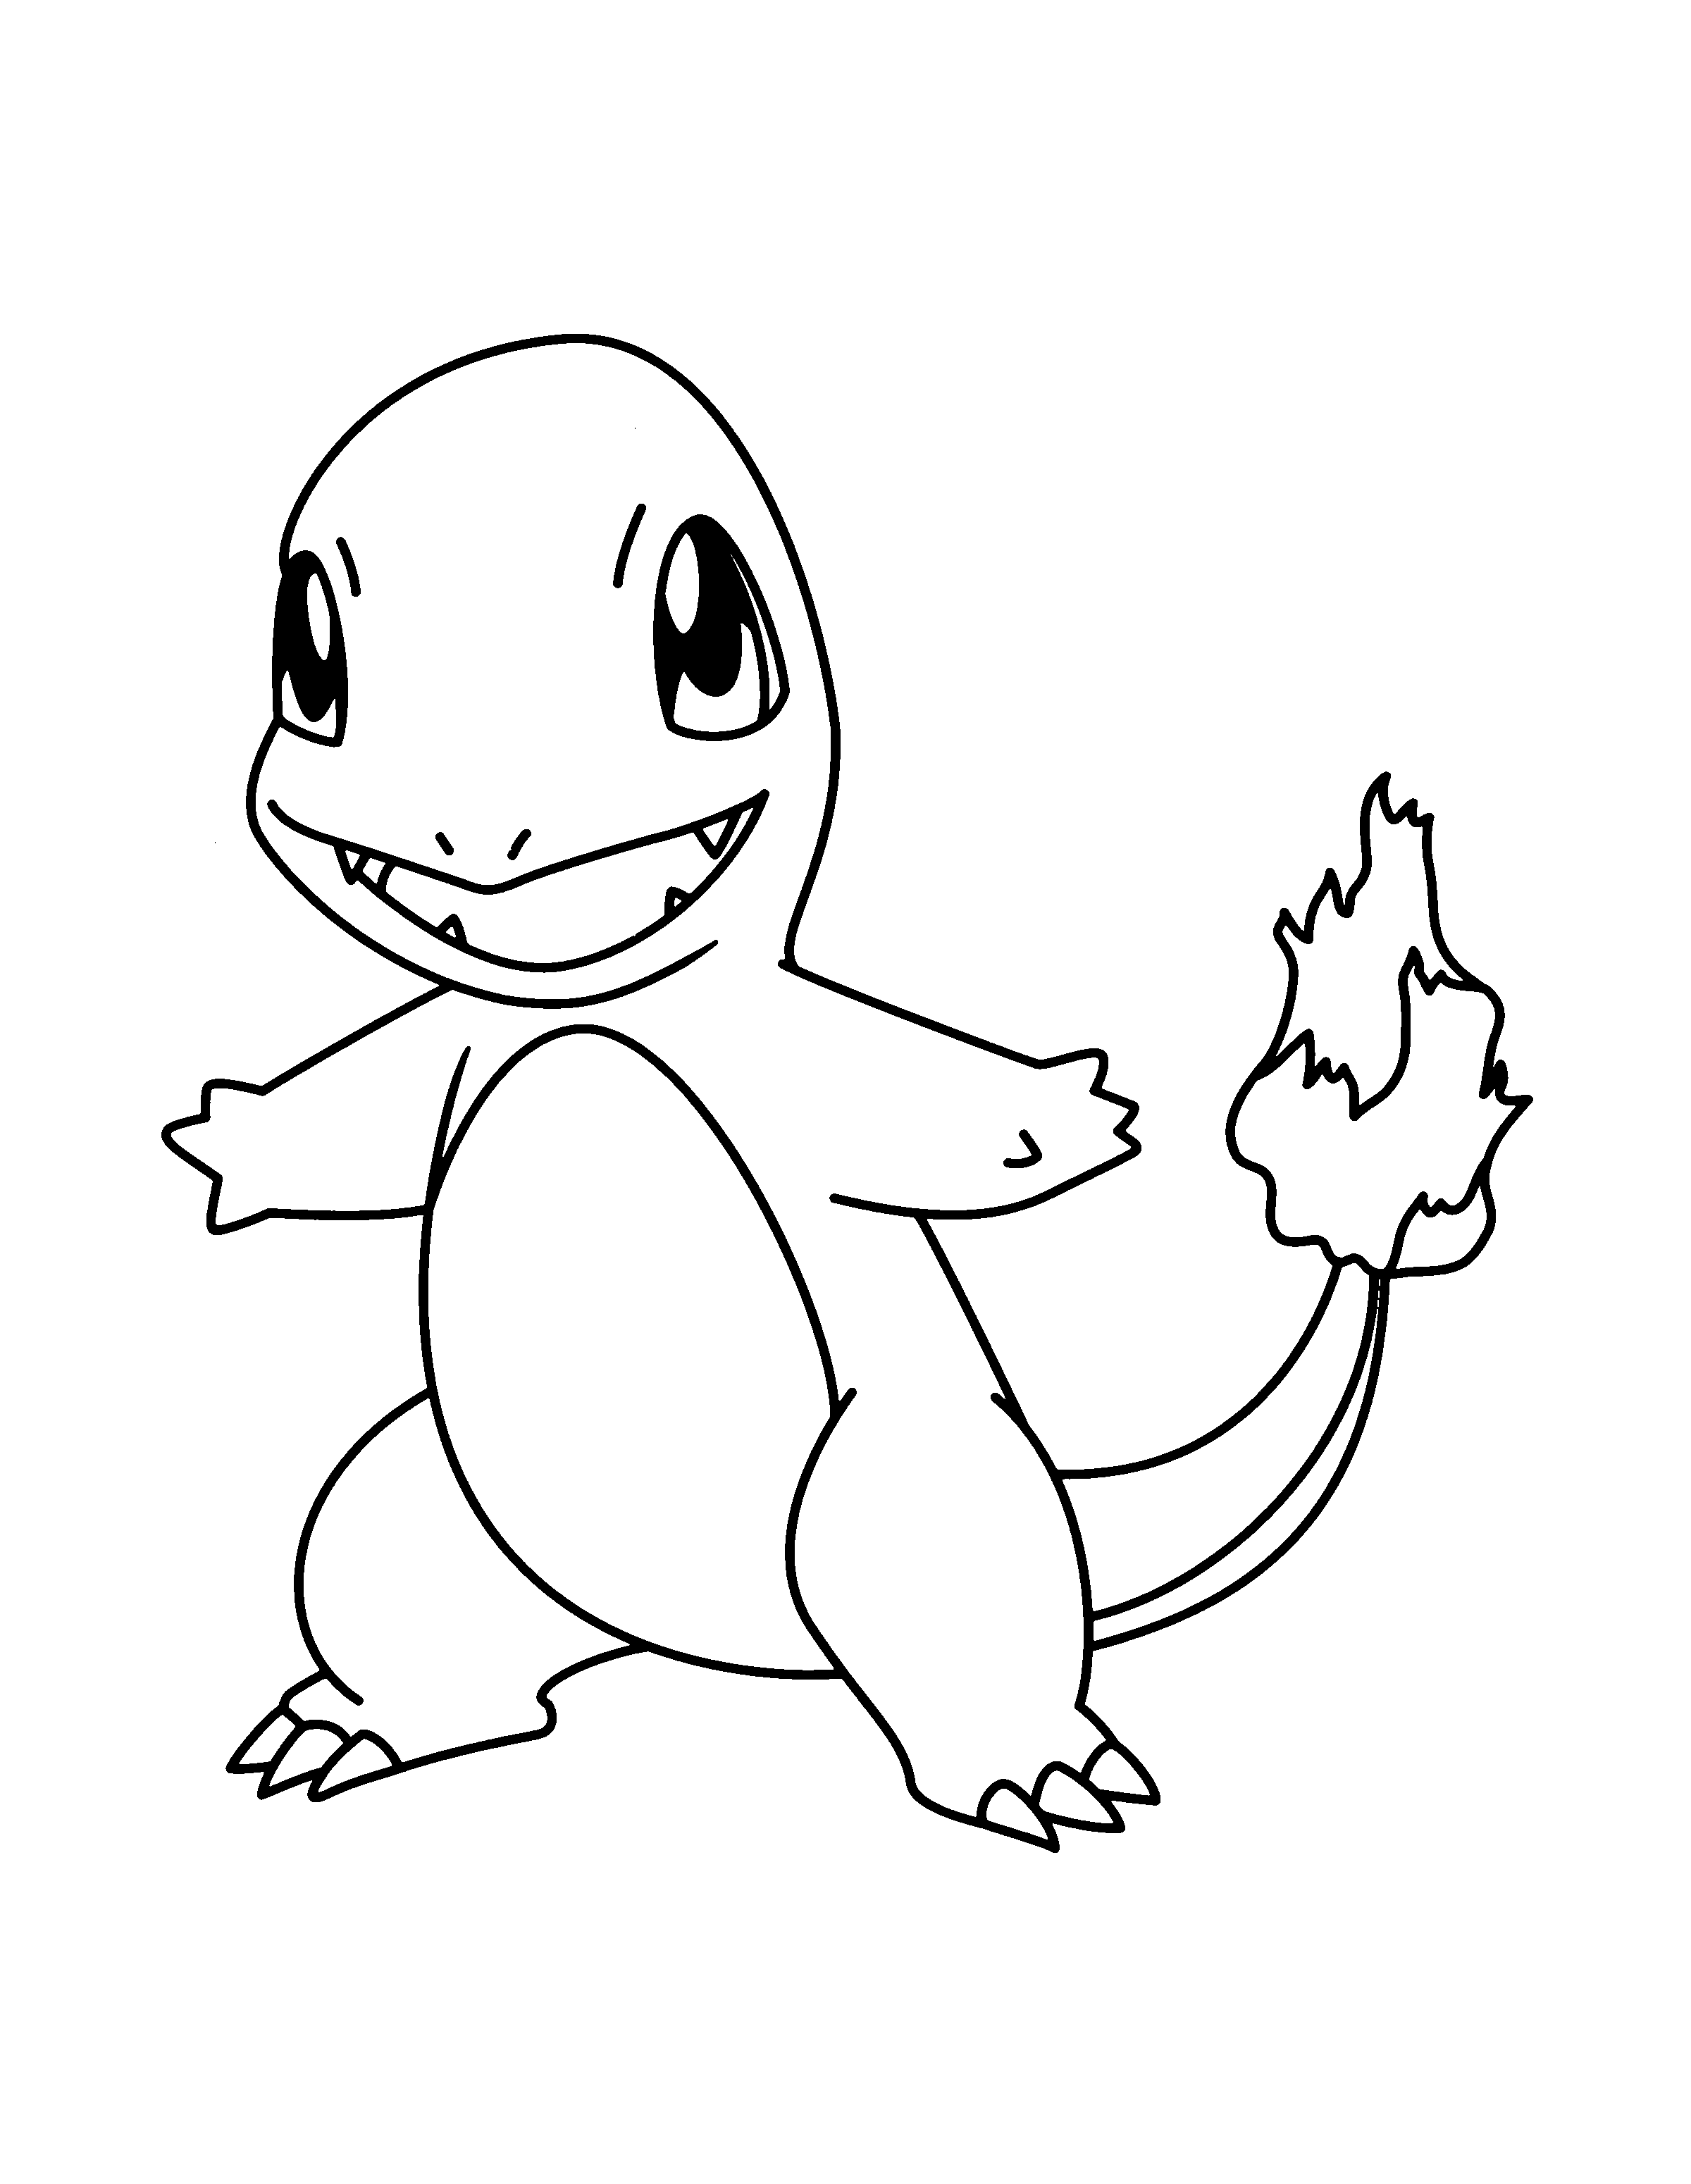 Free Pokemon Charmander Coloring Pages Download Free Clip Art Free Clip Art On Clipart Library We love that game and thought it would be super cool to learn how to draw charmander. clipart library